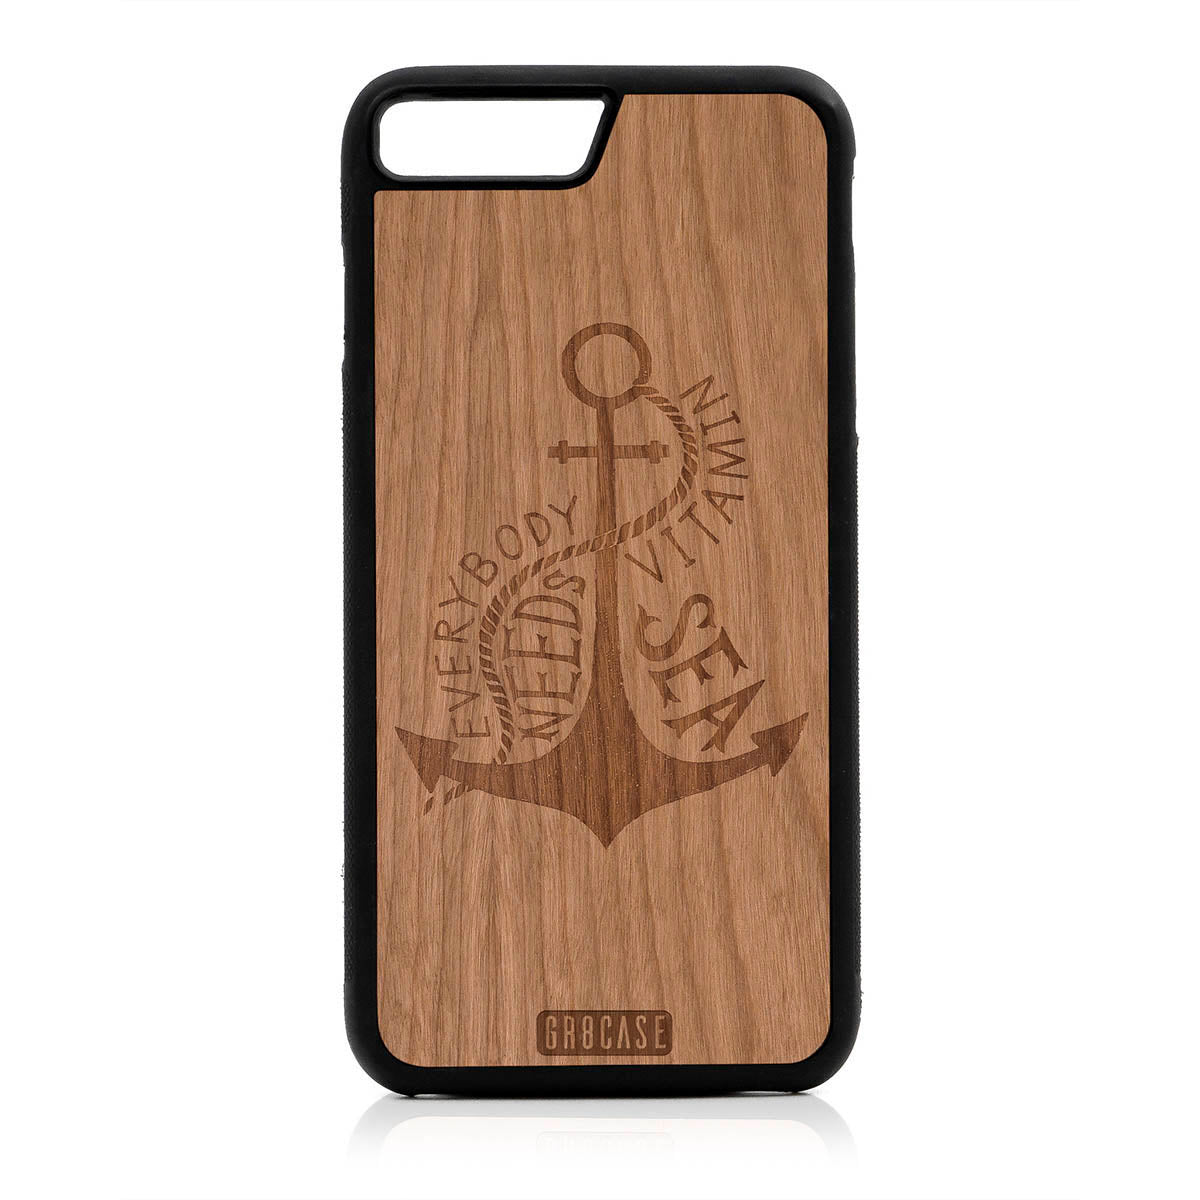 Everybody Needs Vitamin Sea (Anchor) Design Wood Case For iPhone 7 Plus / 8 Plus by GR8CASE